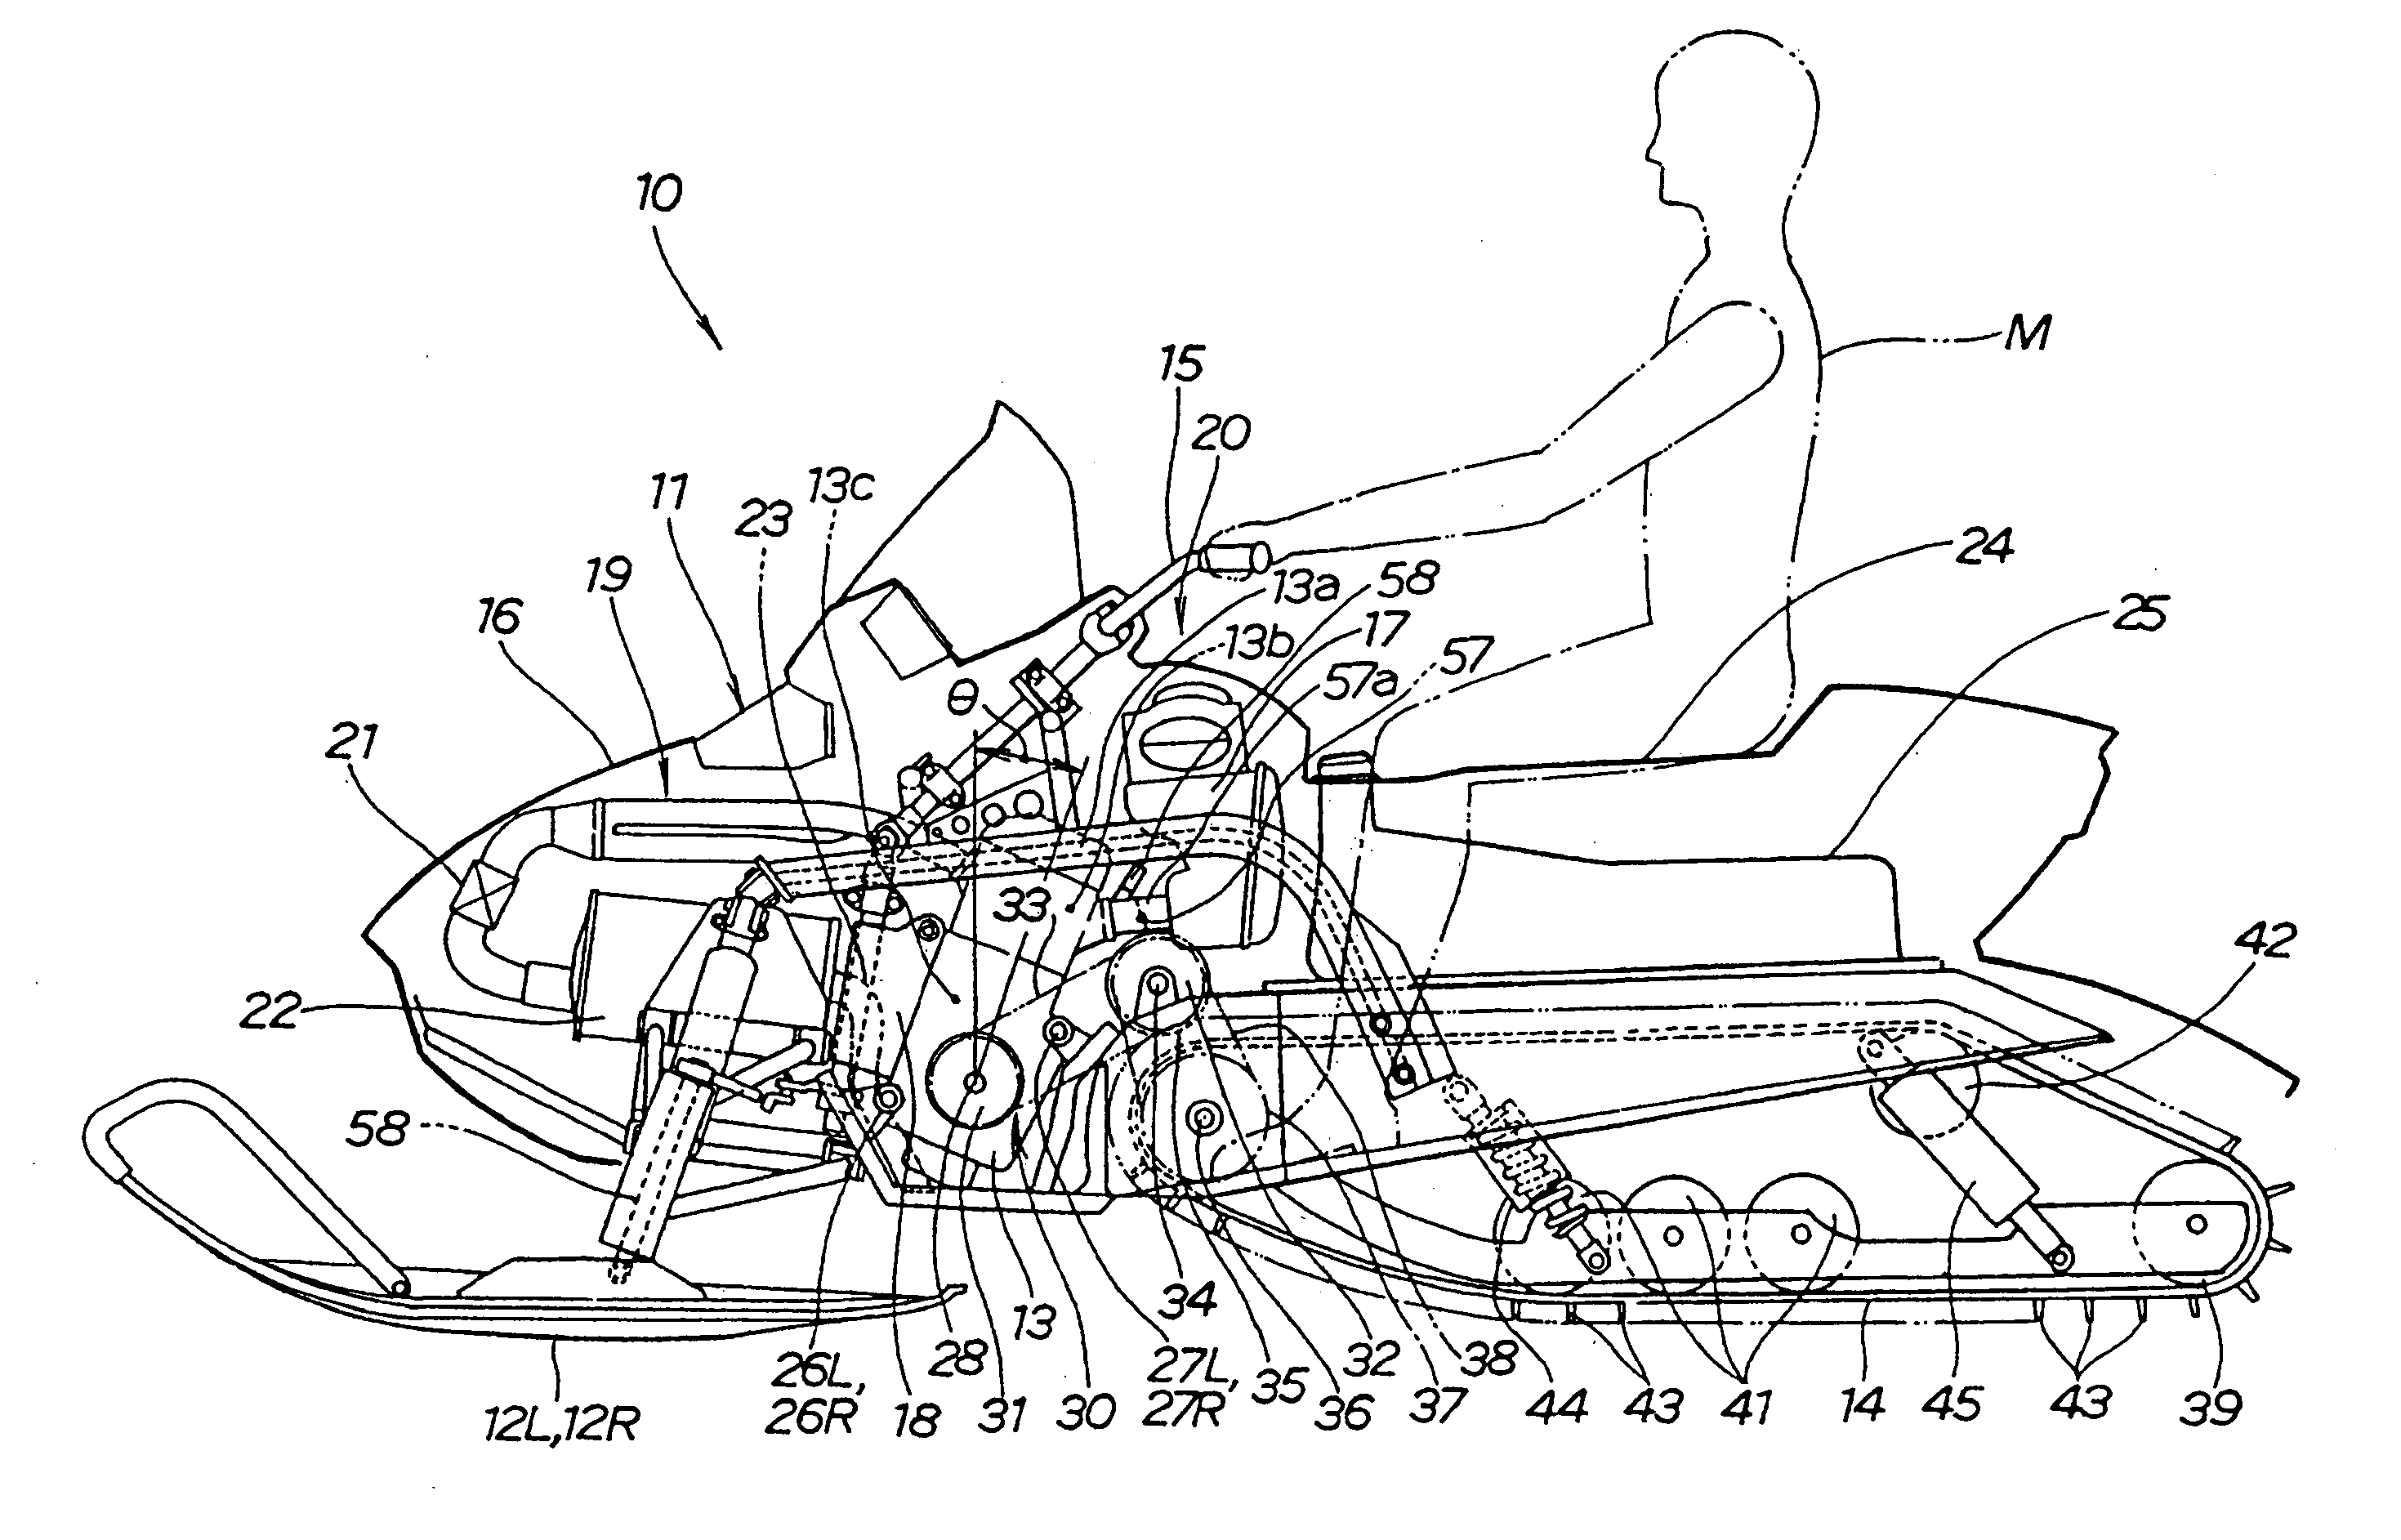 Snowmobile with improved air intake structure